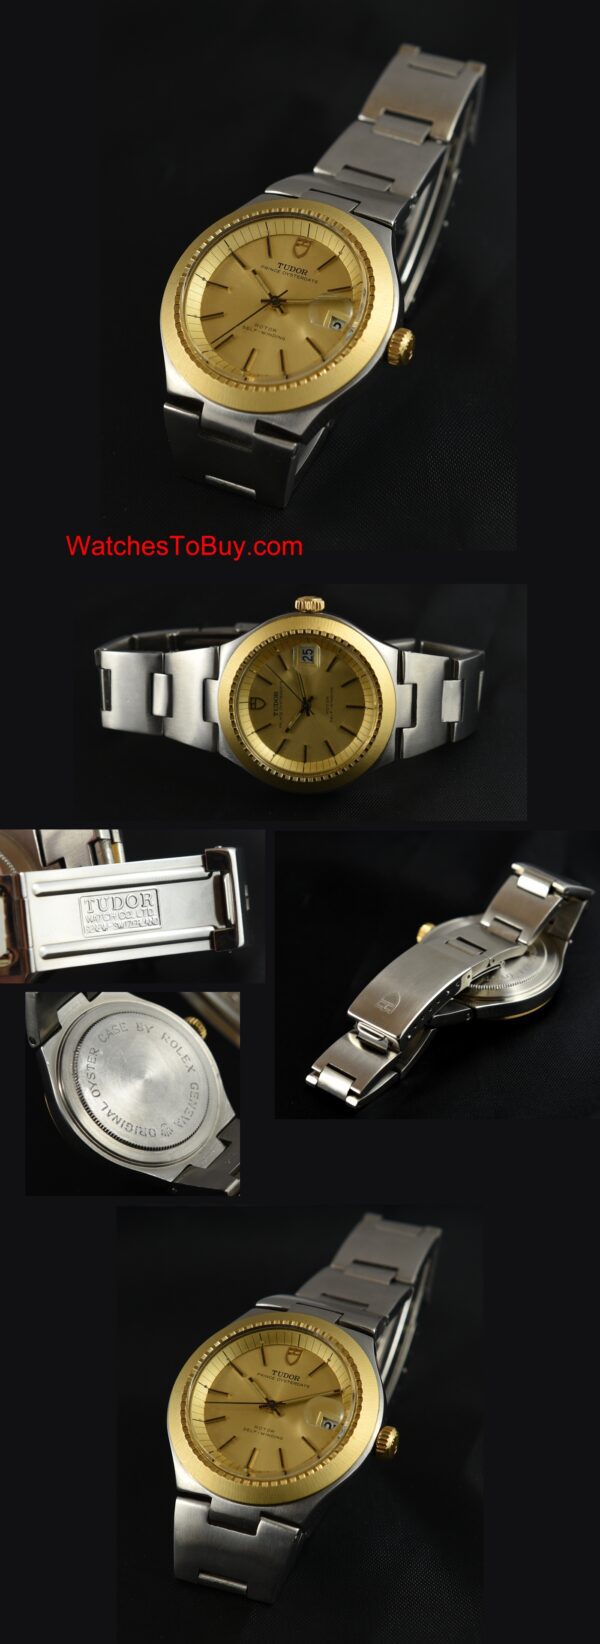 1980s Tudor Prince Oysterdate stainless steel watch with original integrated bracelet, gold bezel, and cleaned automatic winding movement.